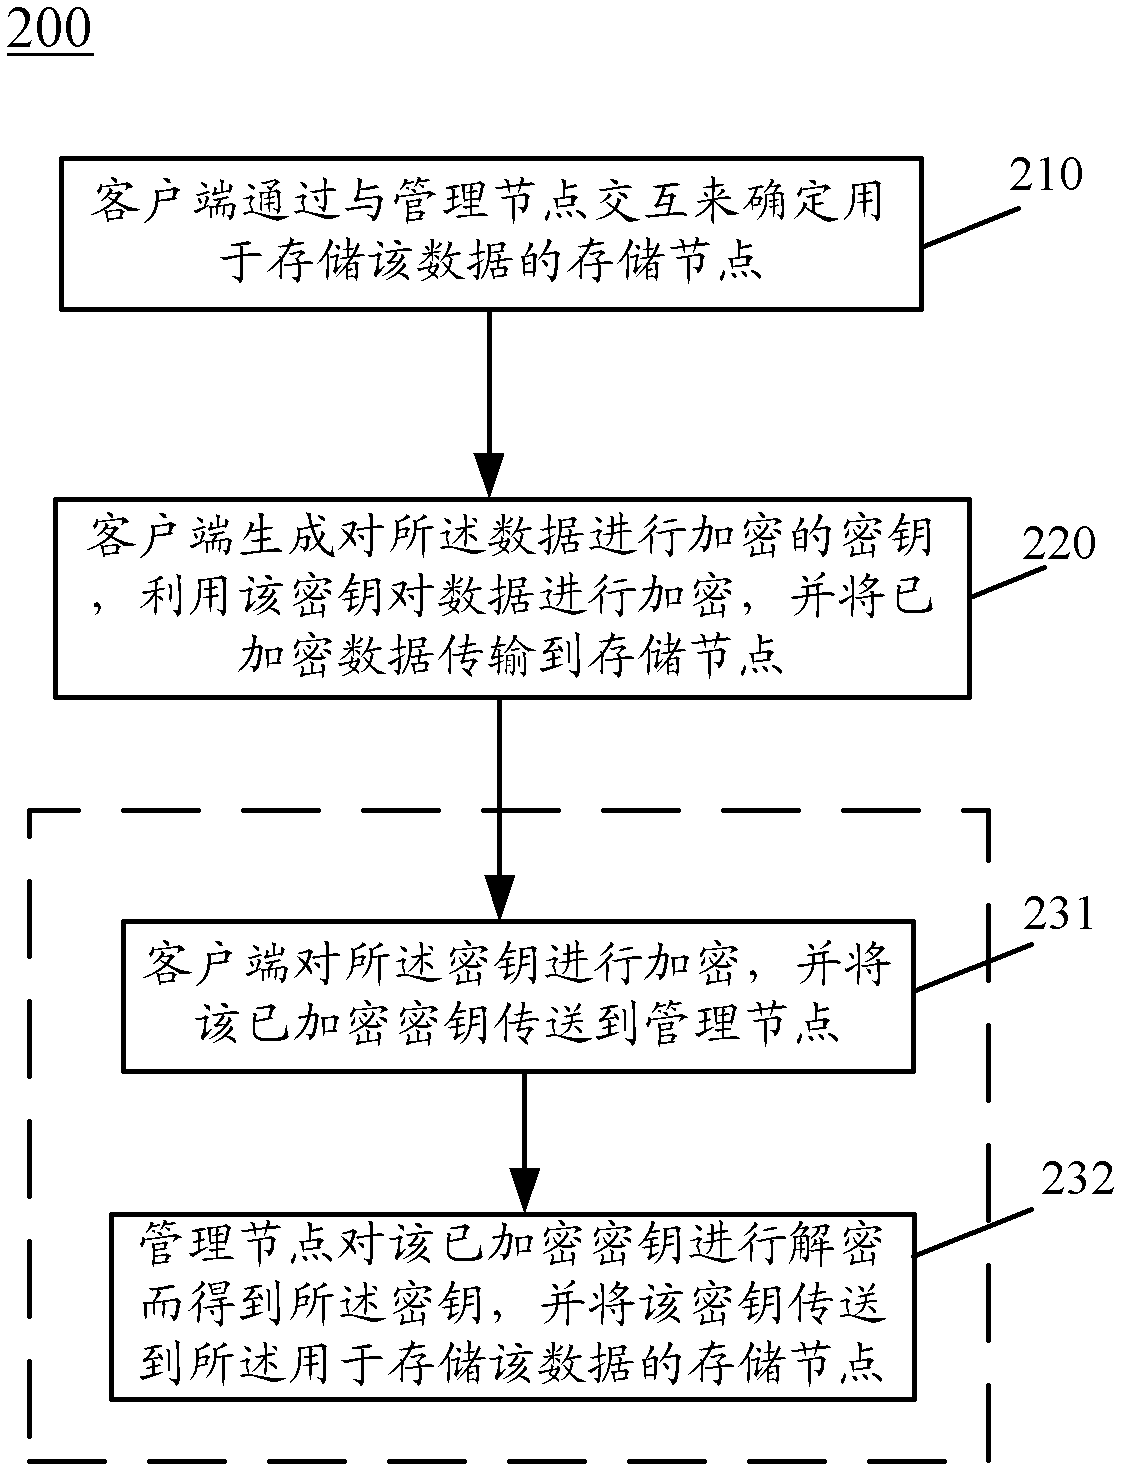 Method and device for transmitting data